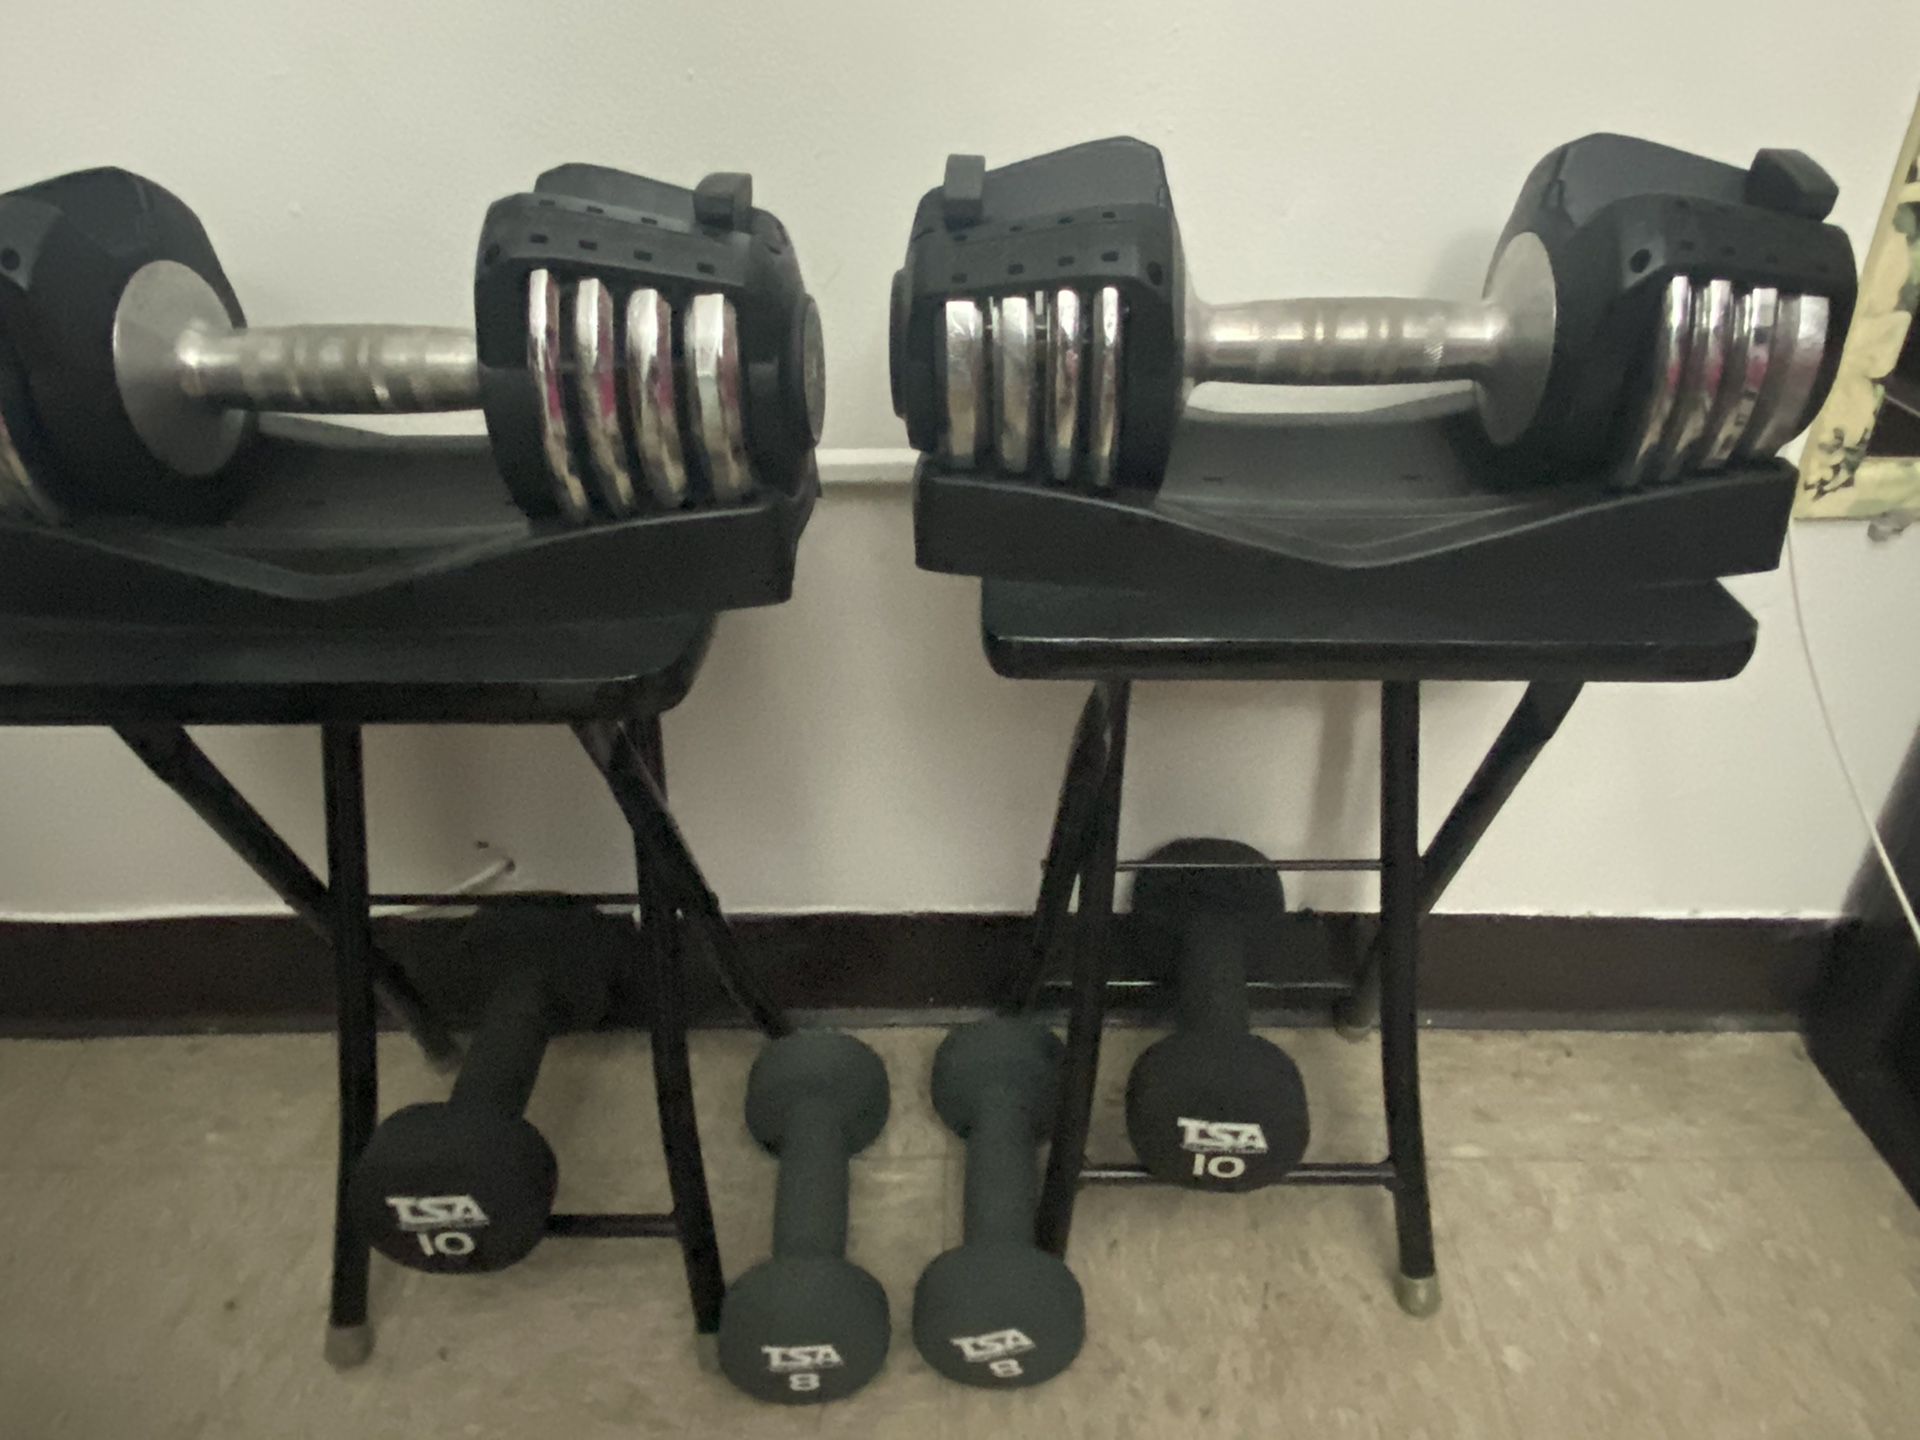 Xmark 25-lb. Adjustable Dumbbells (Pair) A Total Of 50-lb. With Folding Stands